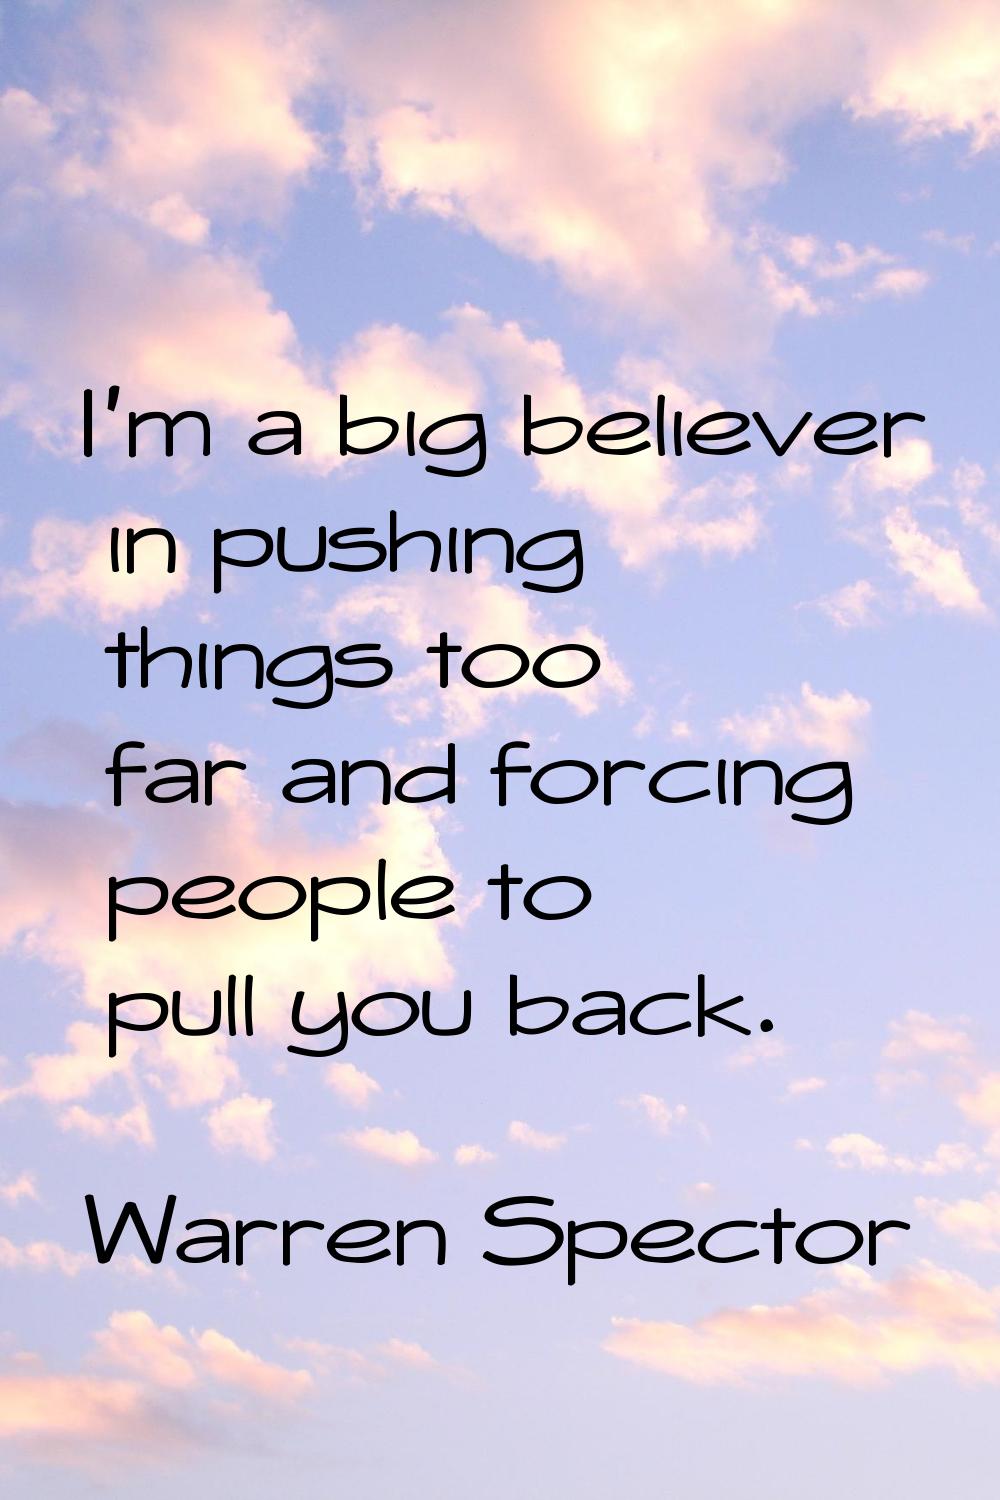 I'm a big believer in pushing things too far and forcing people to pull you back.